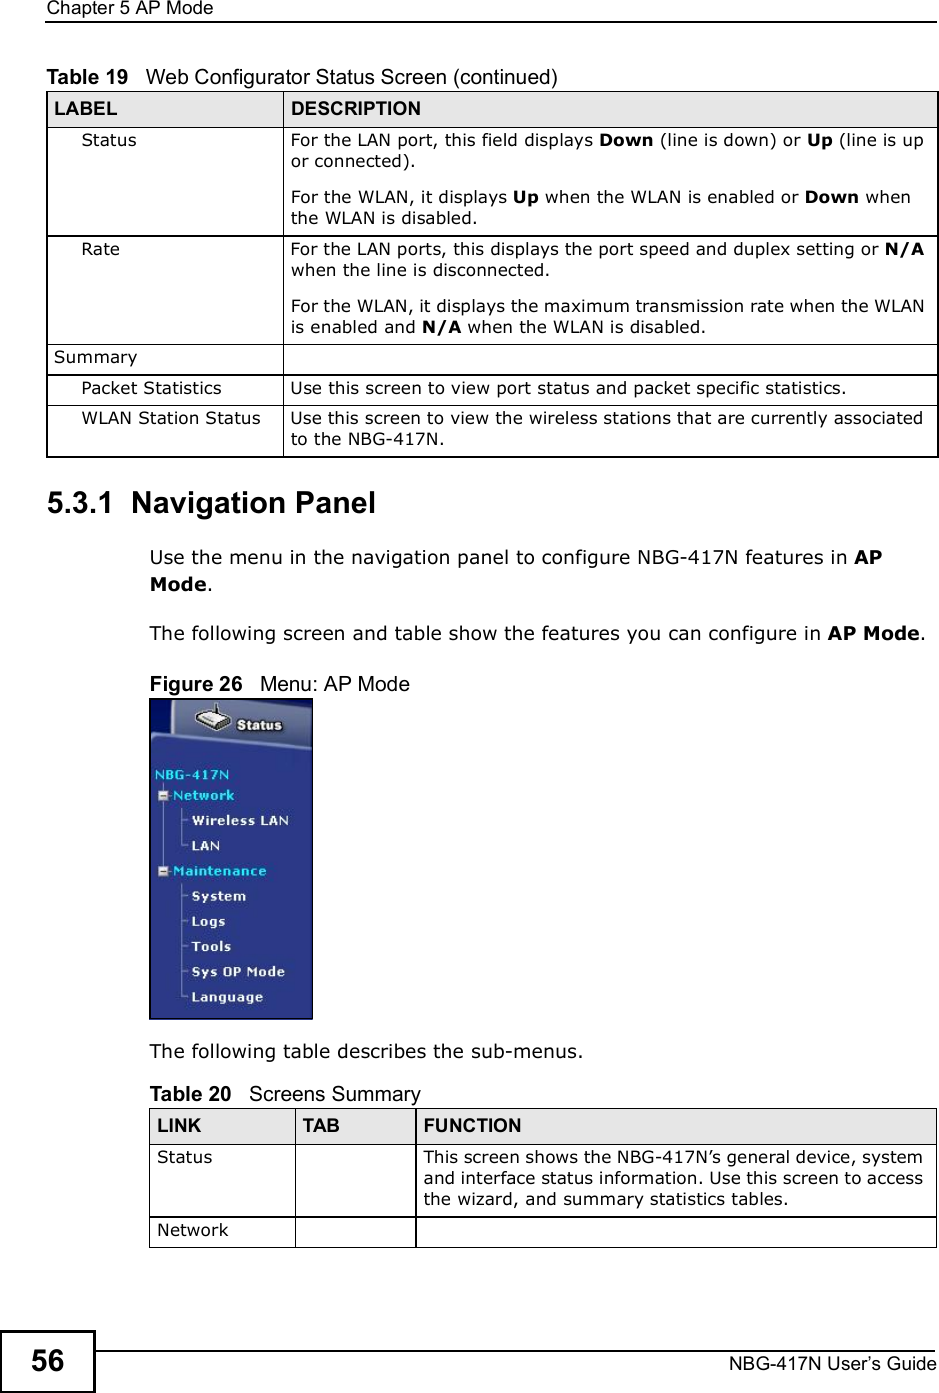 Chapter 5AP ModeNBG-417N User s Guide565.3.1  Navigation PanelUse the menu in the navigation panel to configure NBG-417N features in AP Mode.The following screen and table show the features you can configure in AP Mode.Figure 26   Menu: AP ModeThe following table describes the sub-menus.StatusFor the LAN port, this field displays Down (line is down) or Up (line is up or connected).For the WLAN, it displays Up when the WLAN is enabled or Down when the WLAN is disabled.RateFor the LAN ports, this displays the port speed and duplex setting or N/A when the line is disconnected.For the WLAN, it displays the maximum transmission rate when the WLAN is enabled and N/A when the WLAN is disabled.SummaryPacket StatisticsUse this screen to view port status and packet specific statistics.WLAN Station StatusUse this screen to view the wireless stations that are currently associated to the NBG-417N.Table 19   Web Configurator Status Screen (continued)LABEL DESCRIPTIONTable 20   Screens SummaryLINK TAB FUNCTIONStatus This screen shows the NBG-417N!s general device, system and interface status information. Use this screen to access the wizard, and summary statistics tables.Network